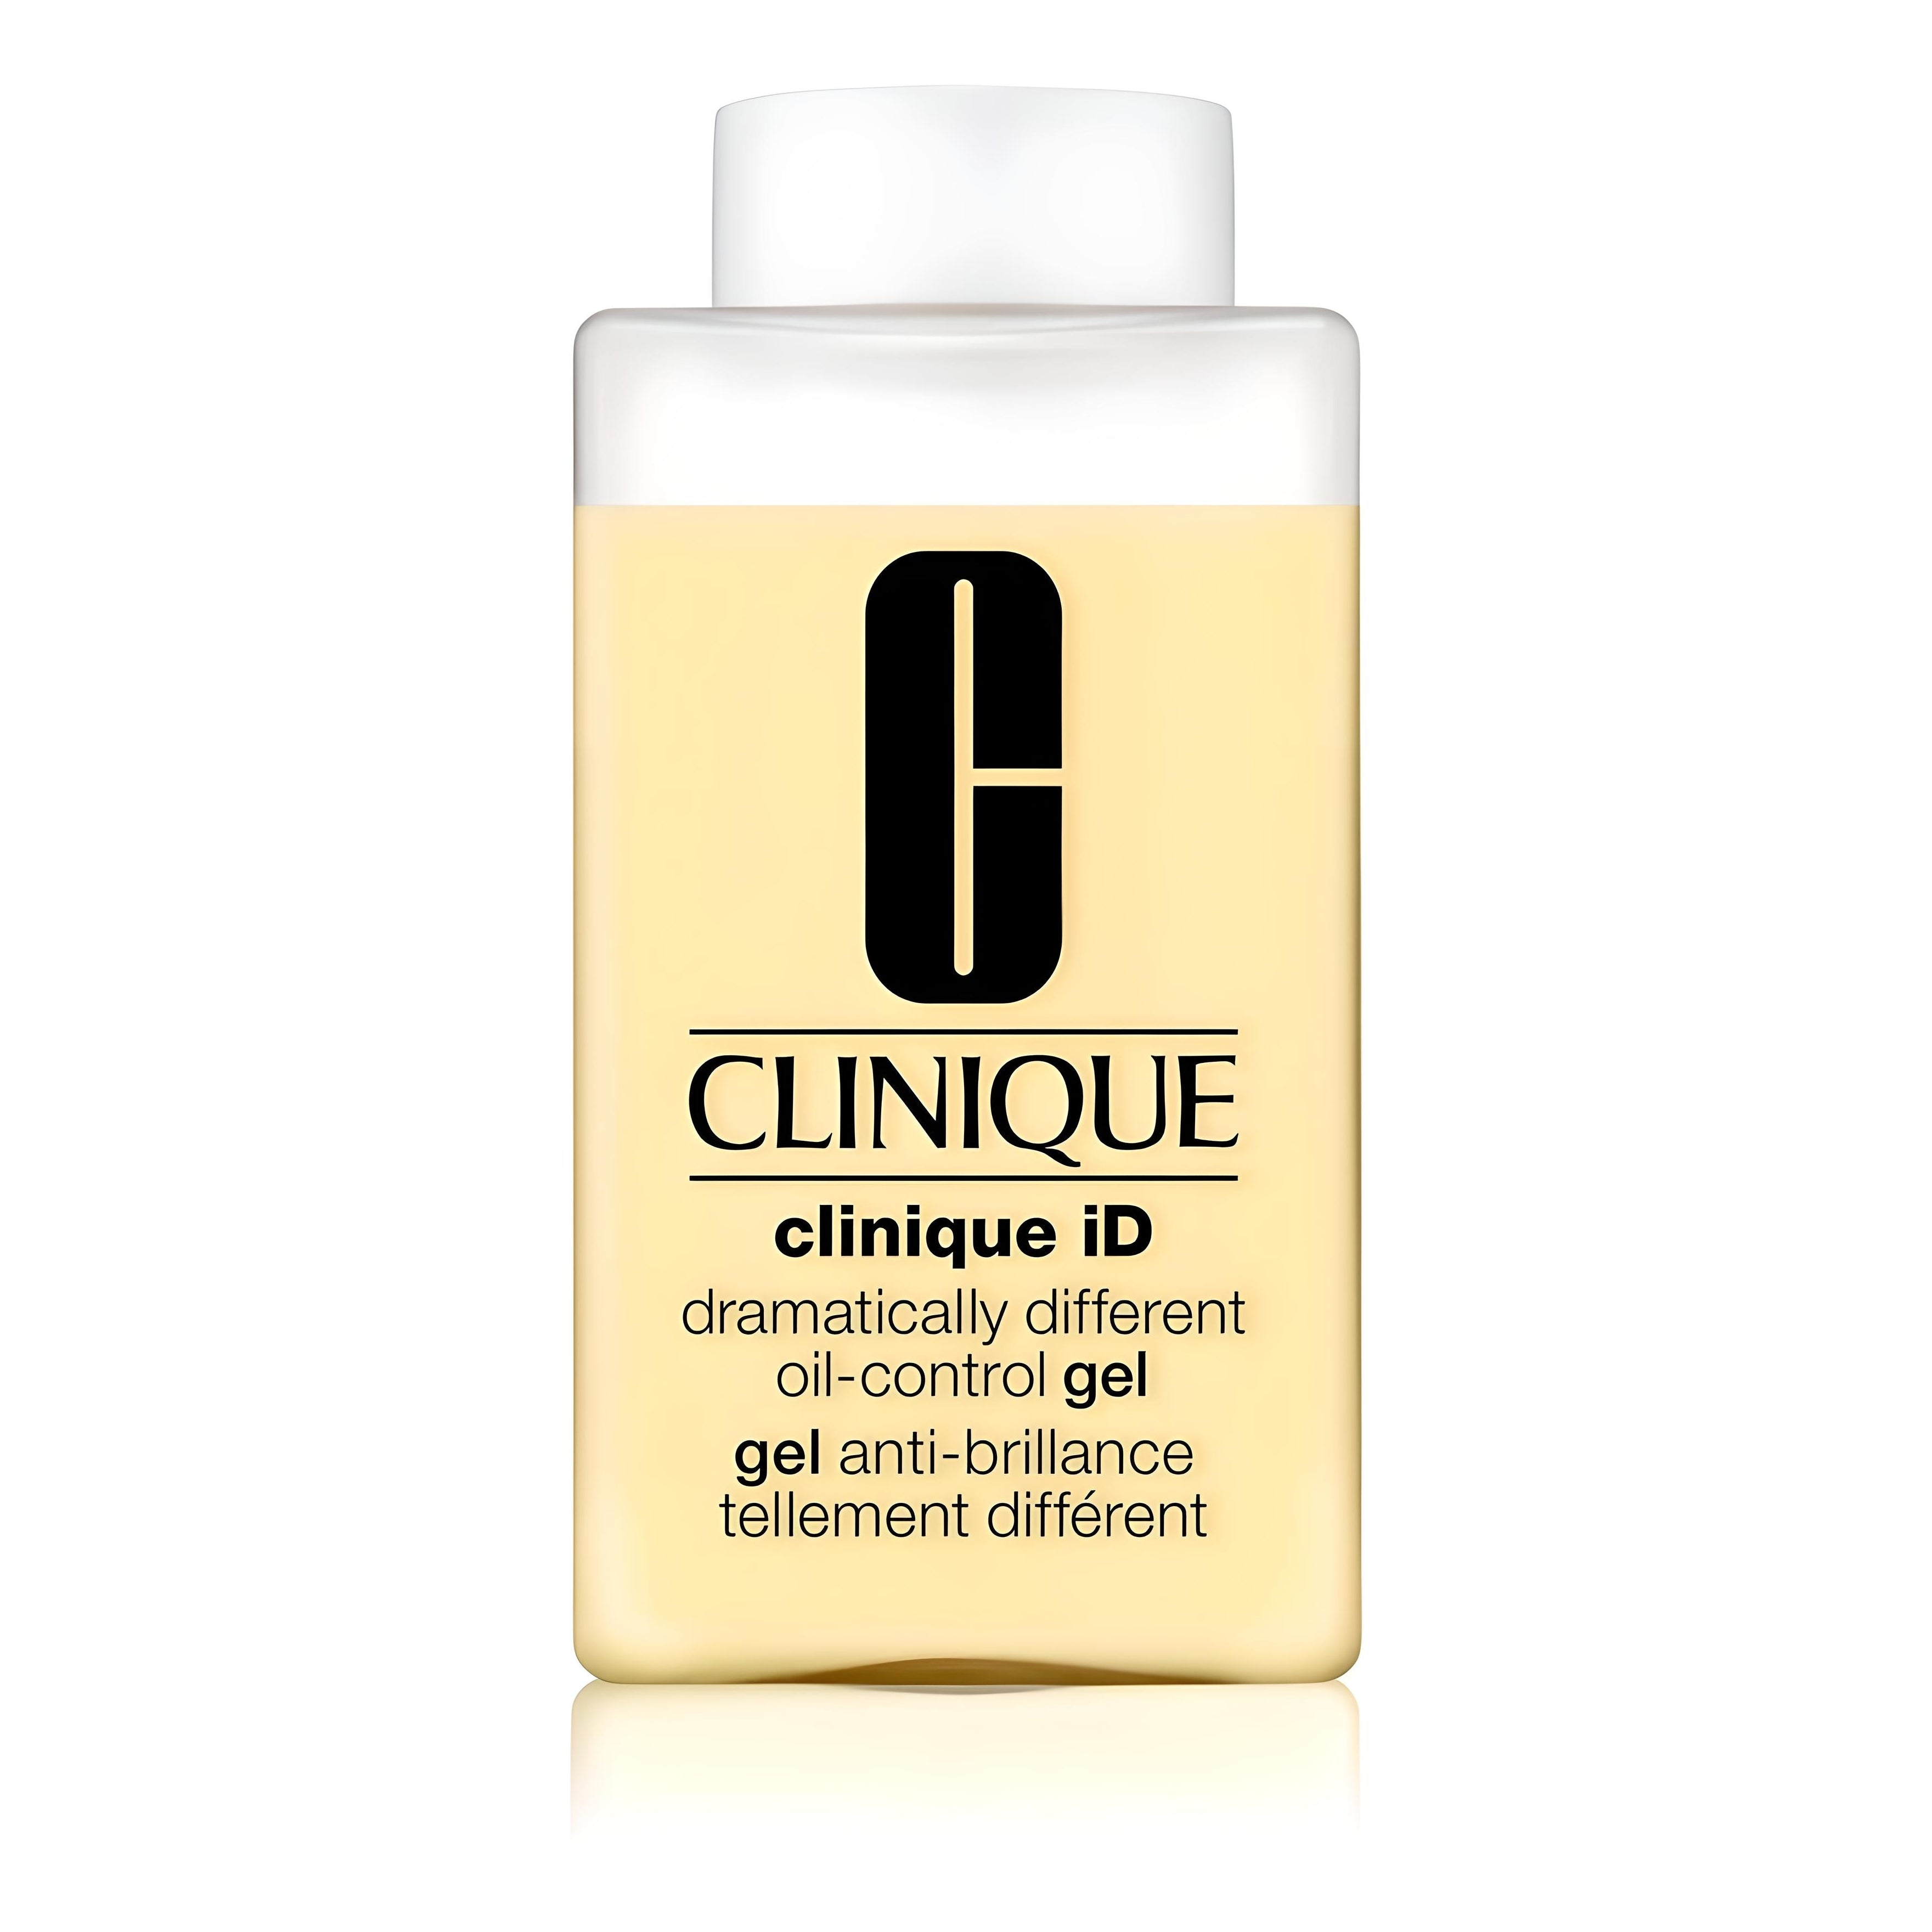 CLINIQUE ID dramatically different oil-free gel